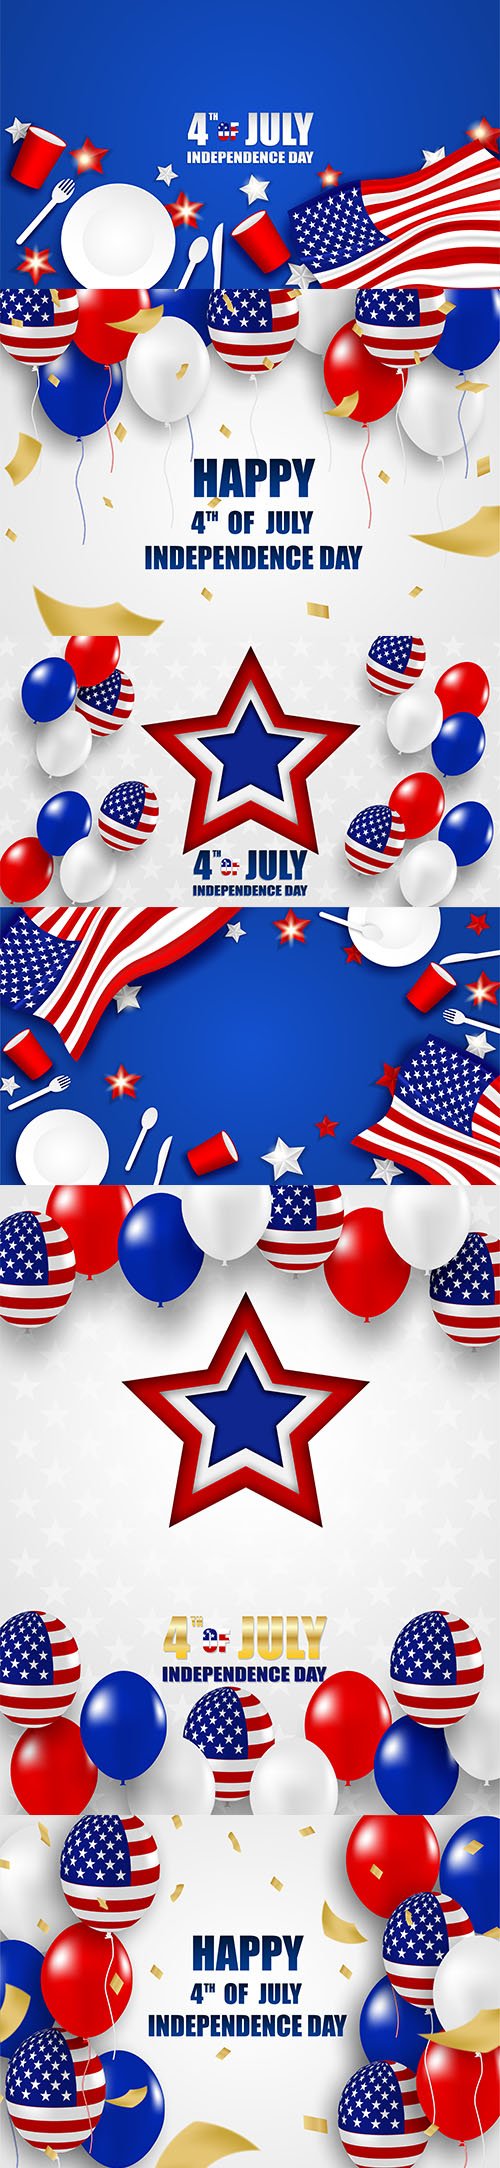 Set of 4th July Happy Independence Day USA Backgrounds